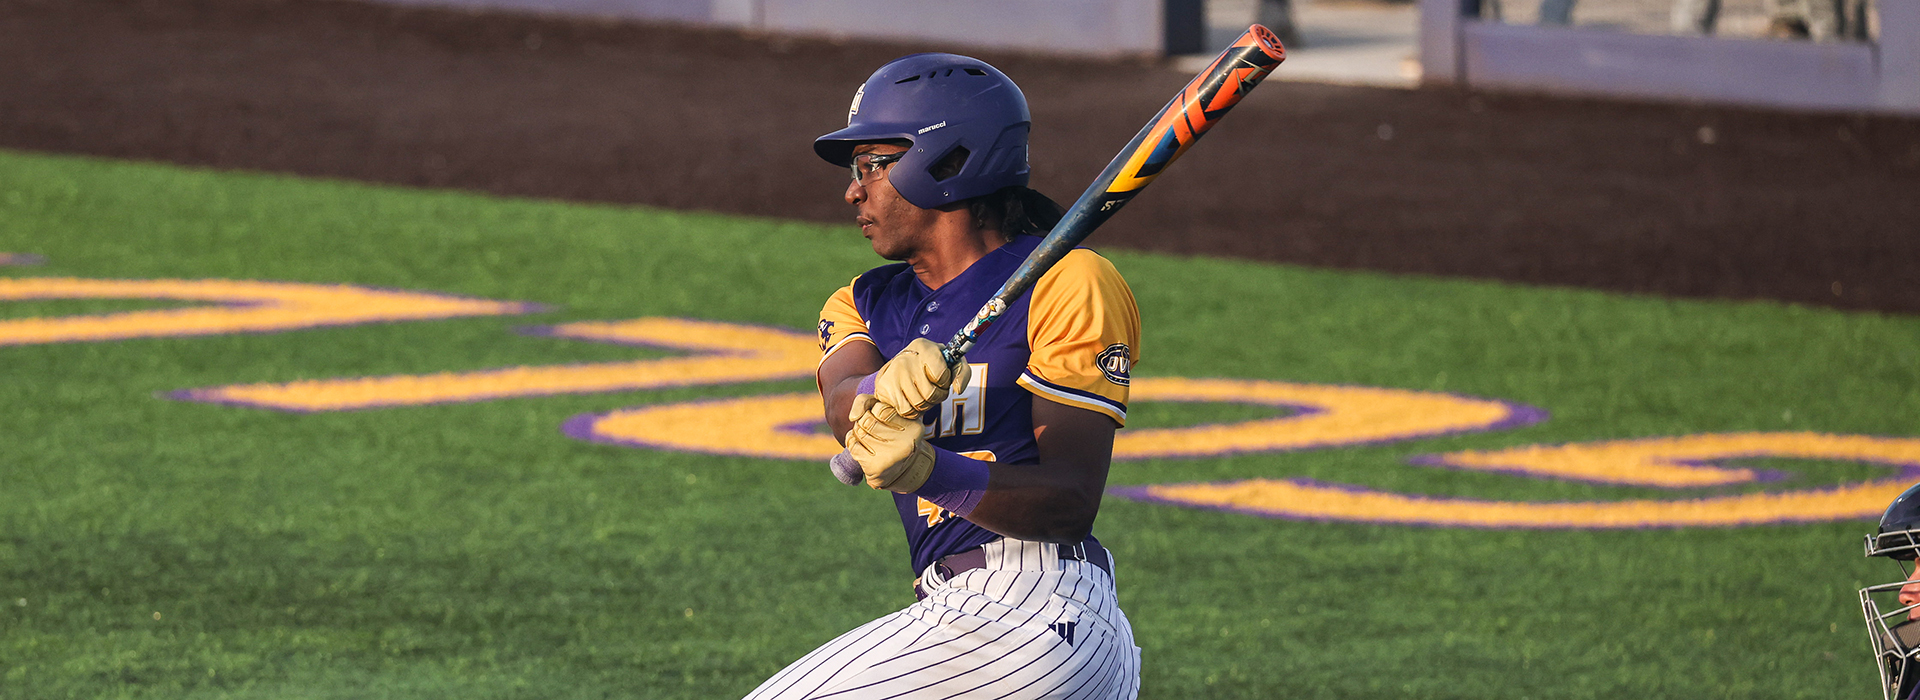 Golden Eagles cruise to 8-1 win to sweep season series with in-state rival Lipscomb